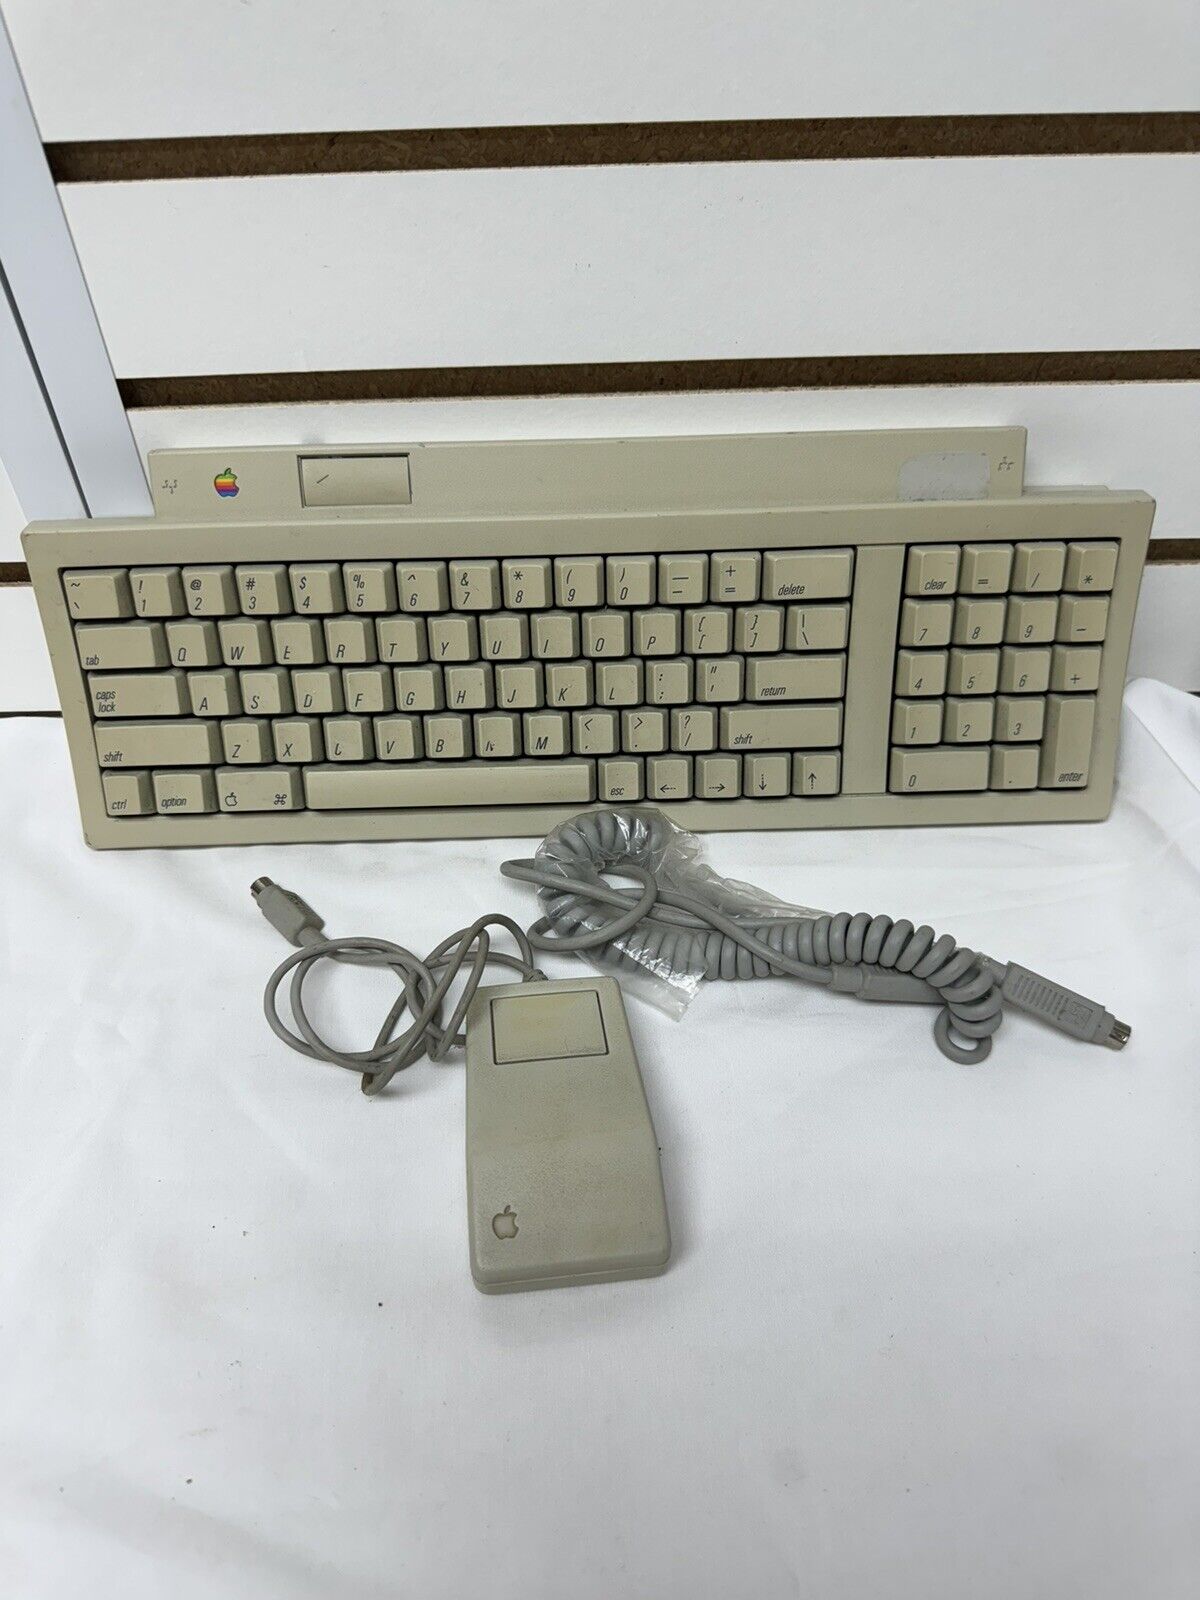 Apple Keyboard II M0487 with Mouse and ADB Cable